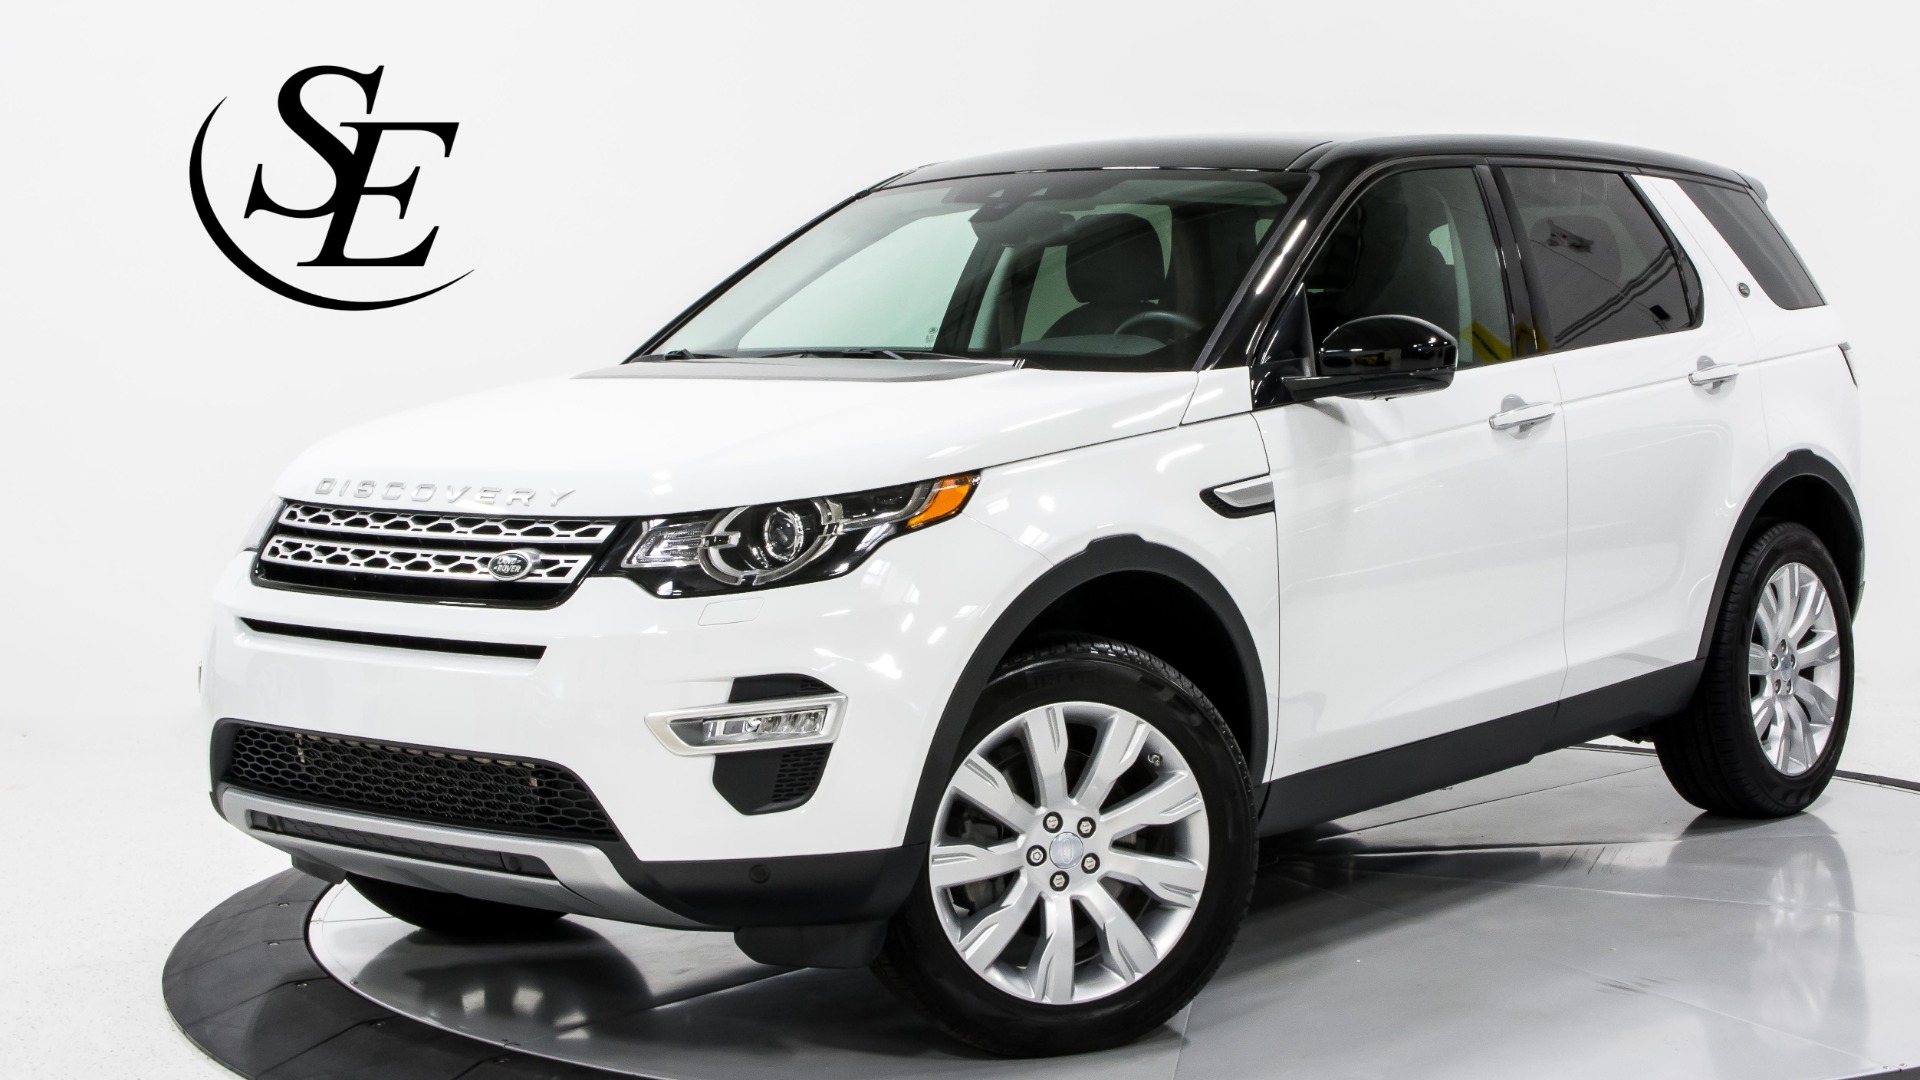 2016 Land Rover Discovery Sport HSE LUX Stock # 22544 for sale near Pompano  Beach, FL | FL Land Rover Dealer